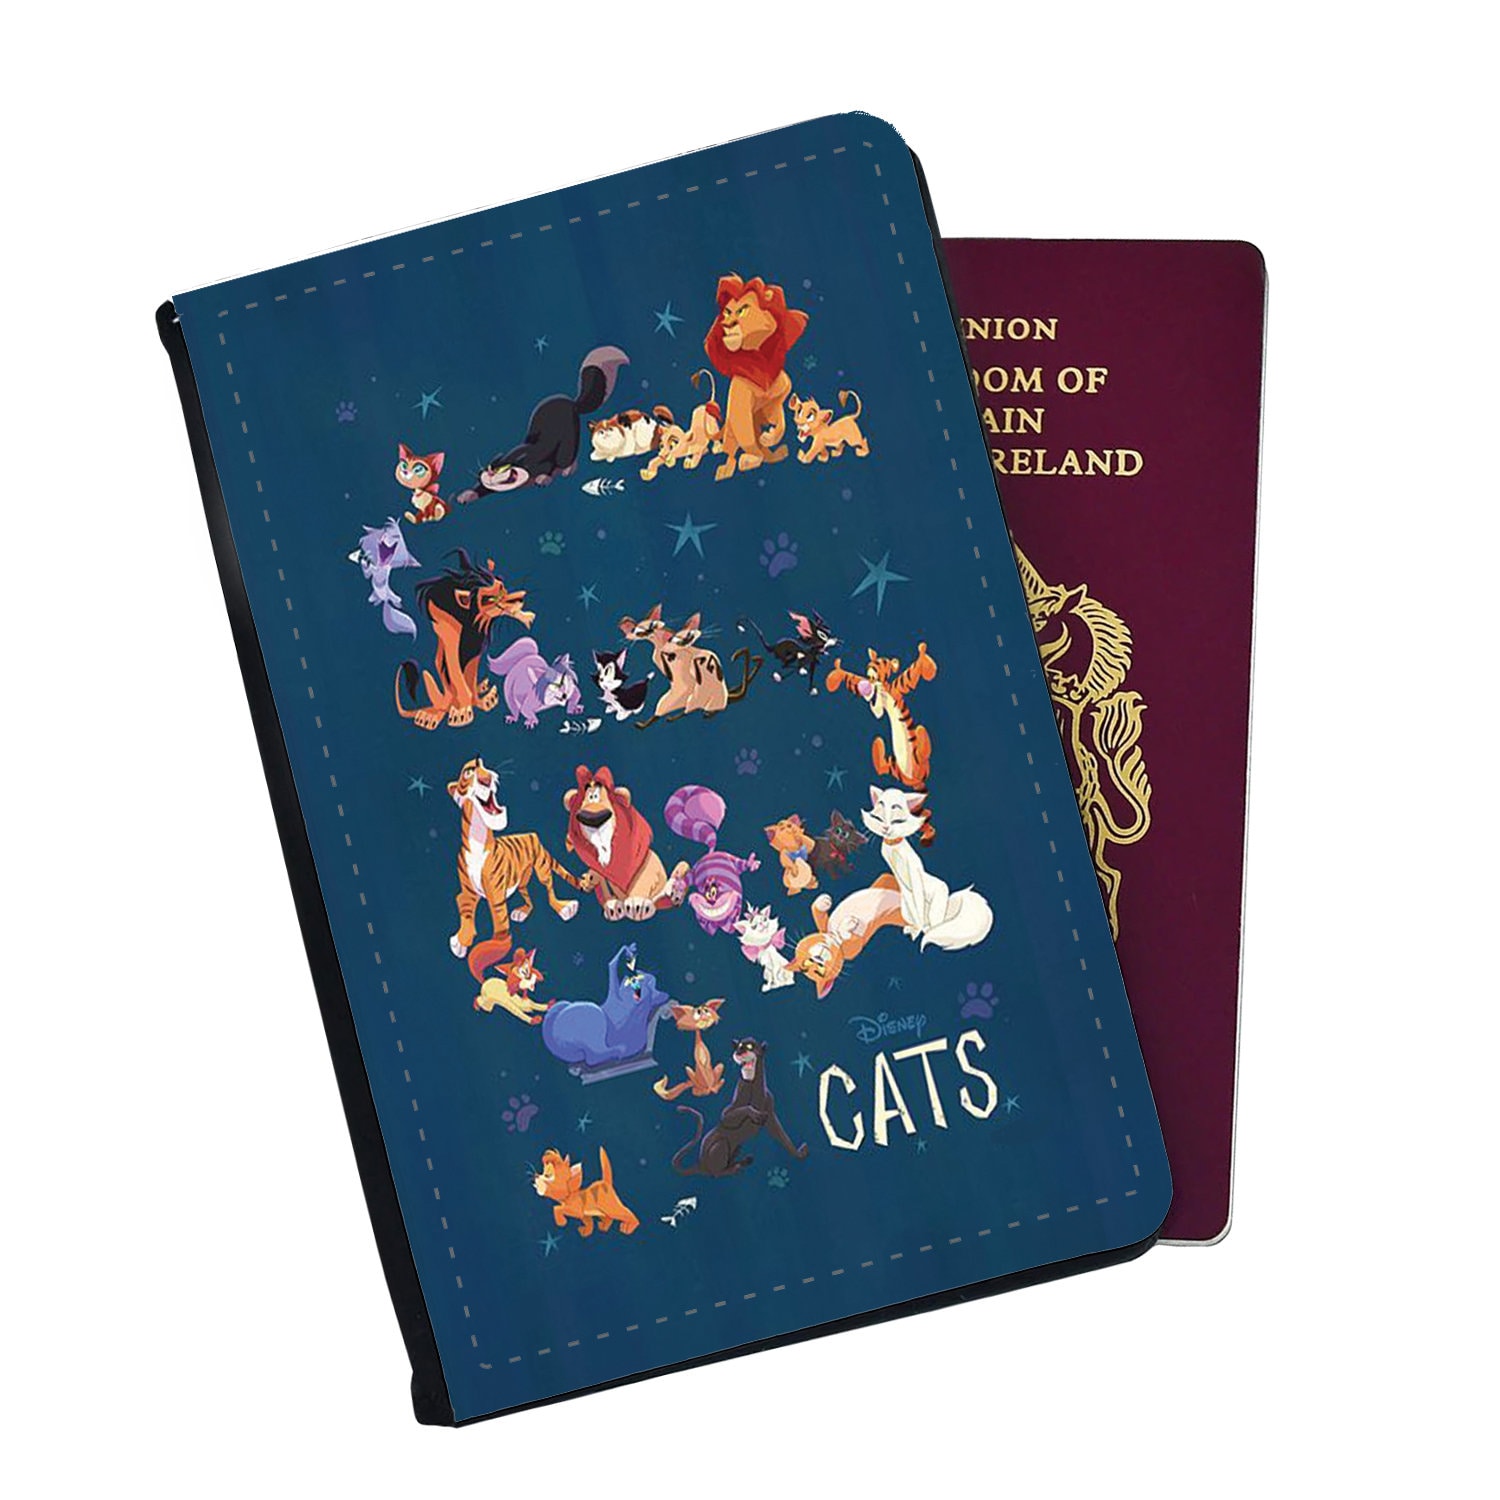 Personalised Faux Leather Passport Cover & Luggage Tag Disney Cheshire Cat Aristocats Pinocchio Simba Mufasa Timon and Pumbaa